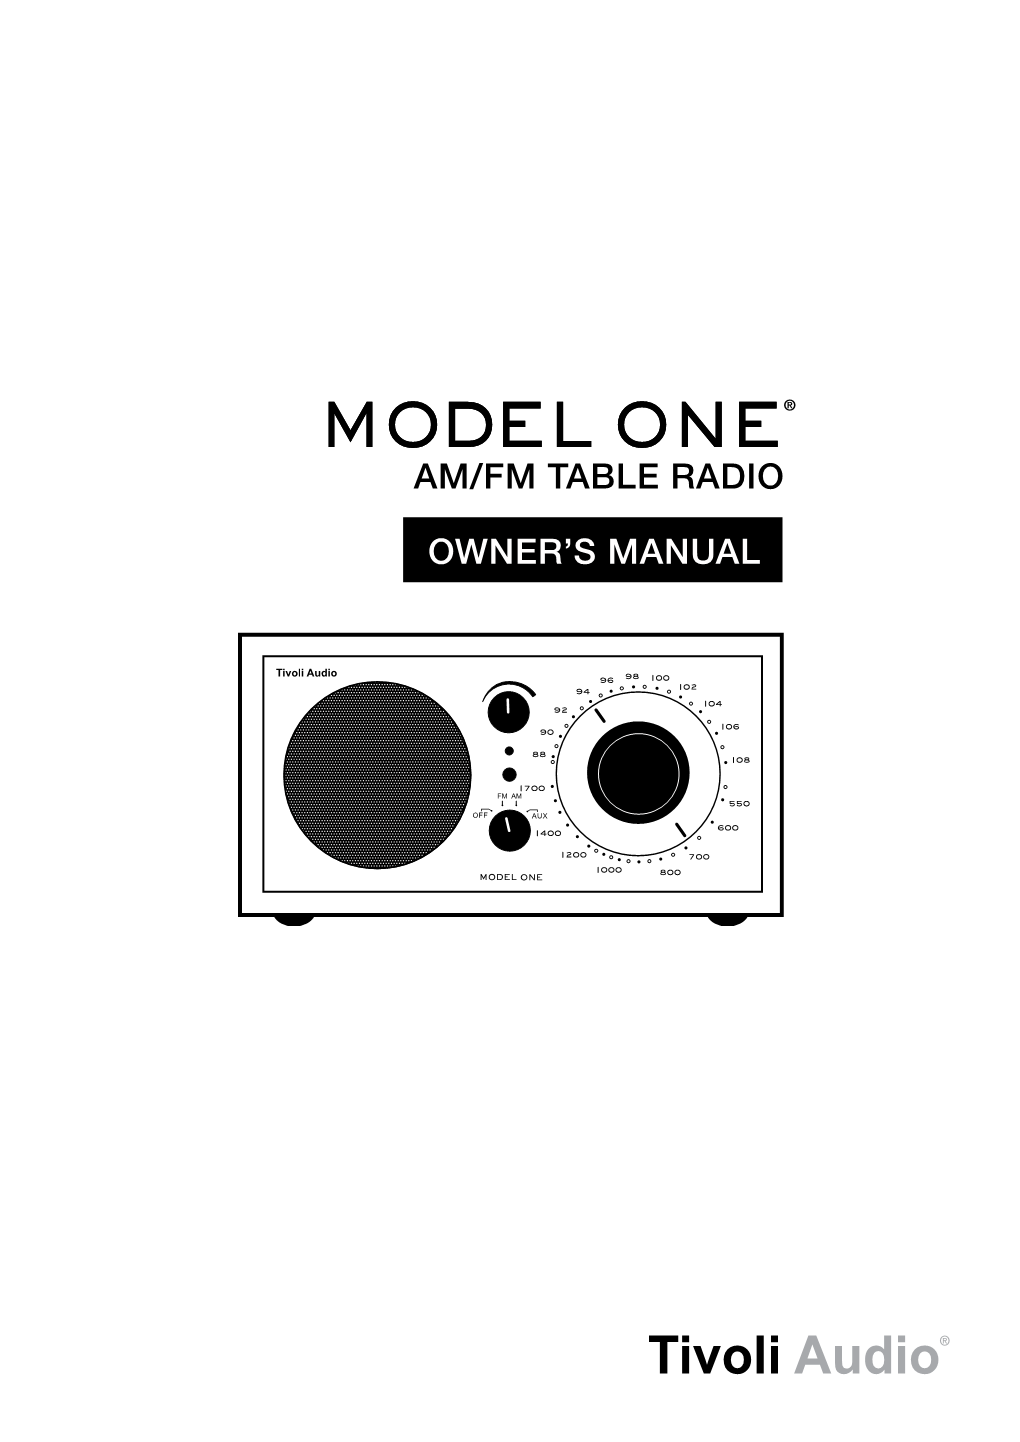 OWNER's MANUAL AM/FM Table Radio